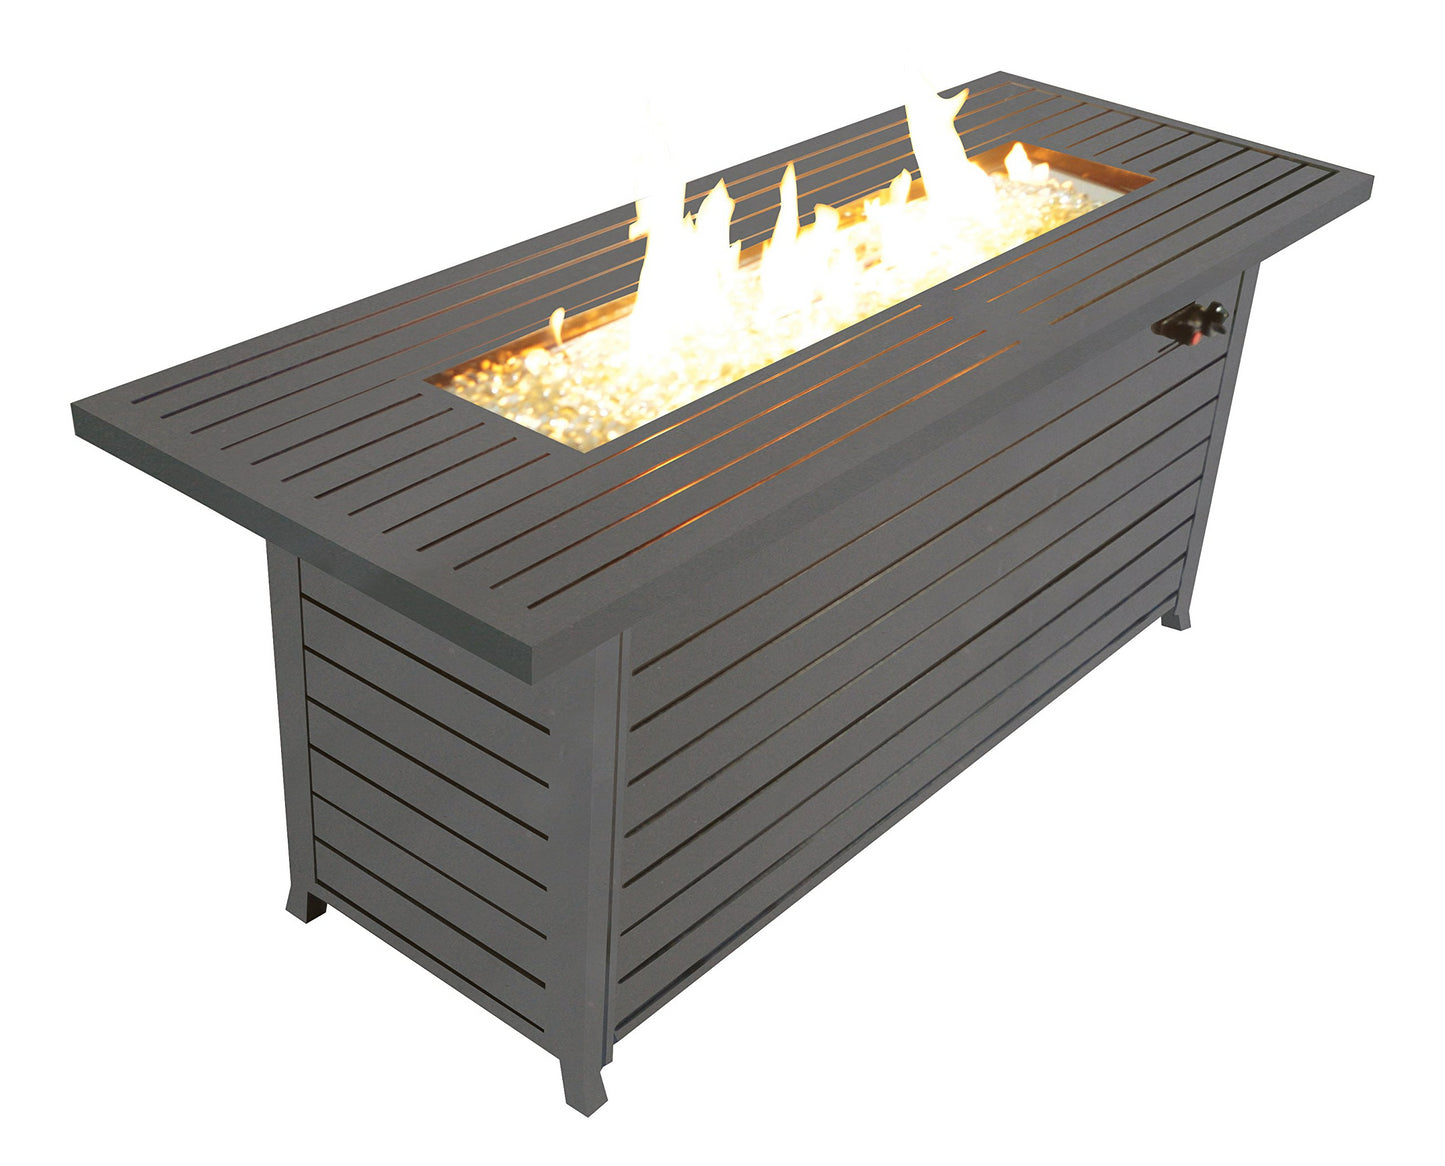 57-Inch Outdoor Propane Fire Pit Table with Lid and Fire Glass - Mocha Aluminum Firepit Dining Table